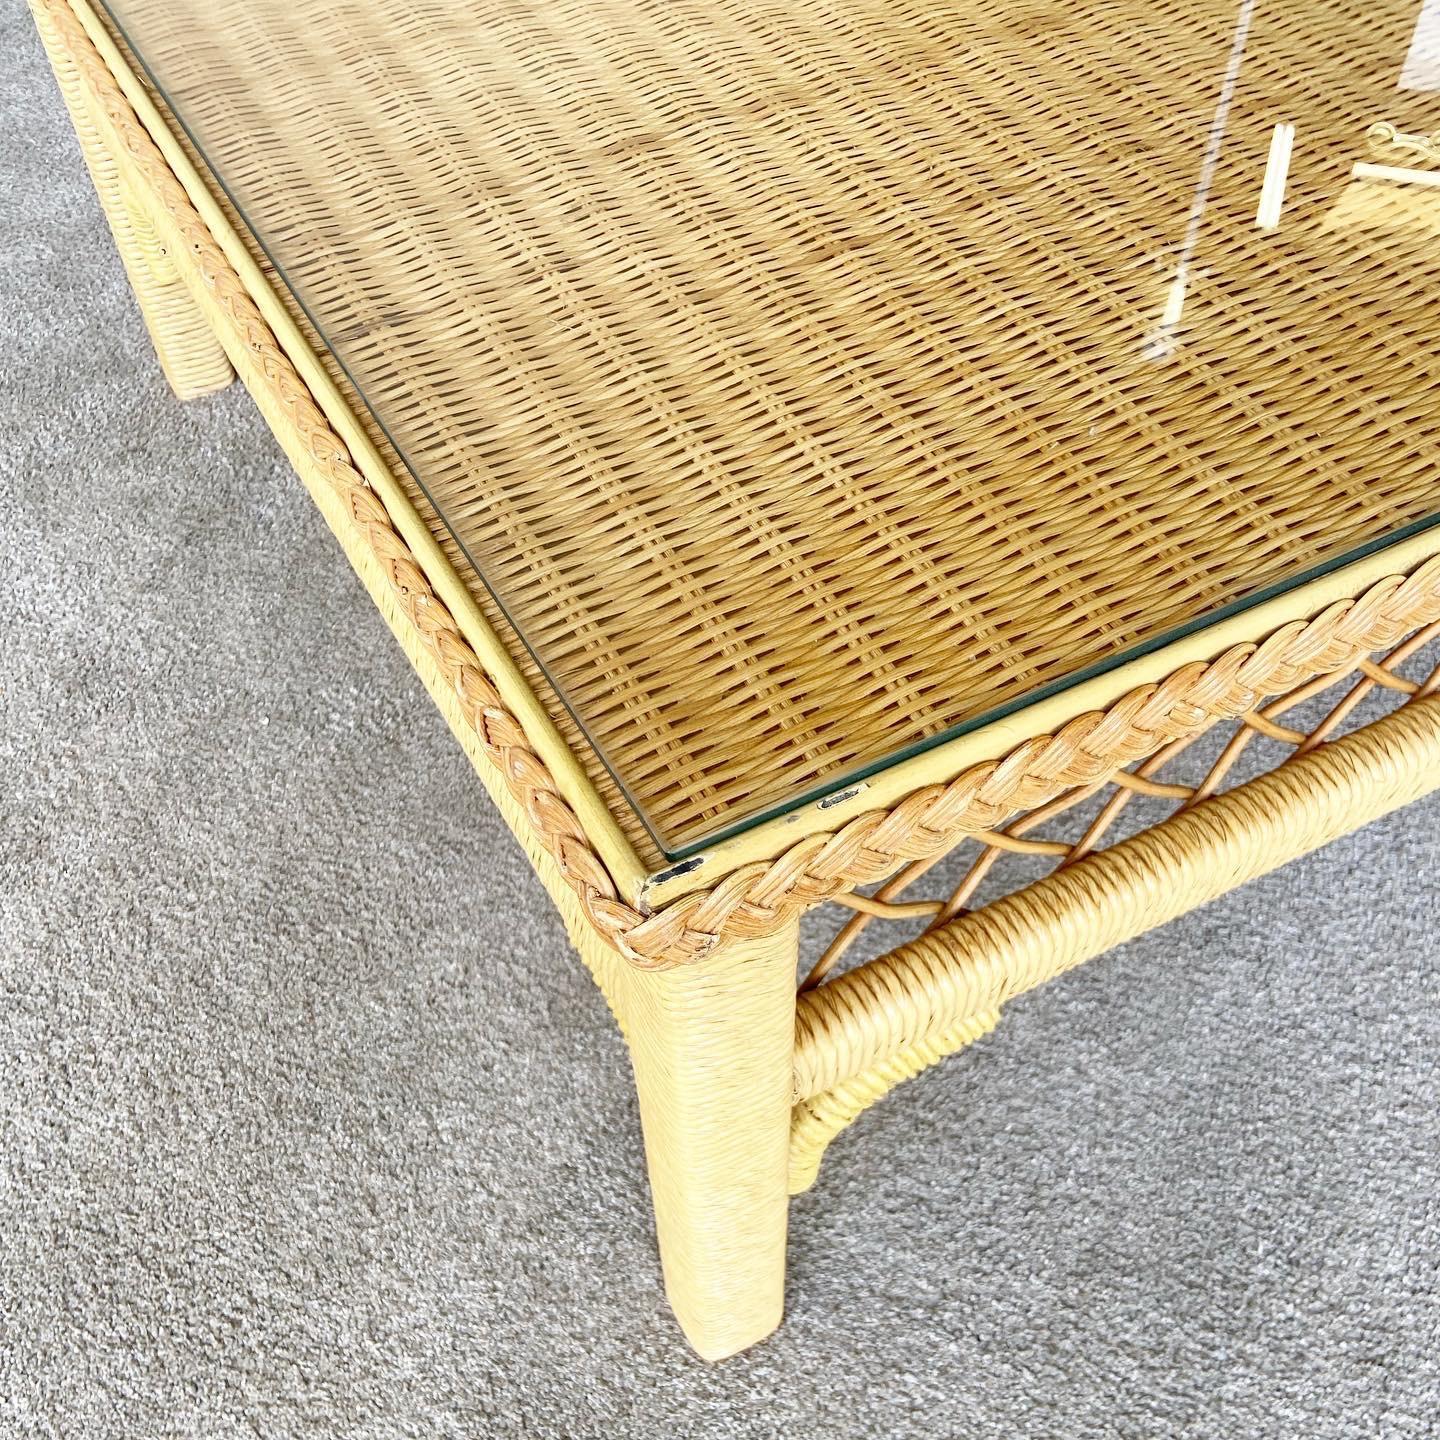 Late 20th Century Boho Chic Wicker Glass Top Coffee Table For Sale